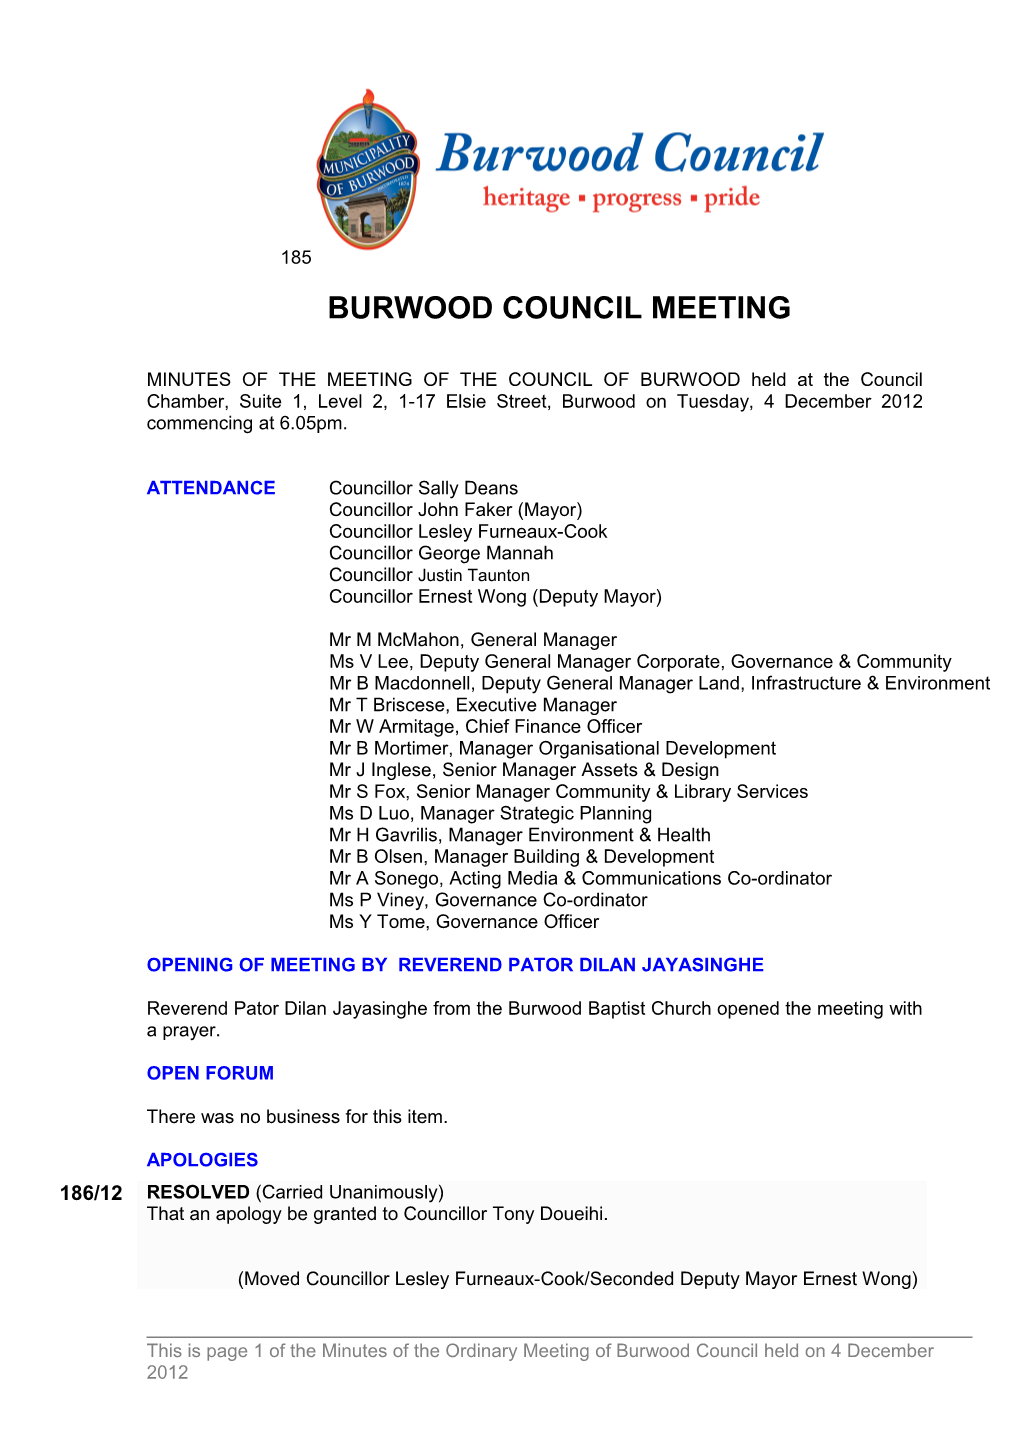 Pro-Forma Minutes of Burwood Council Meetings - 4 December 2012